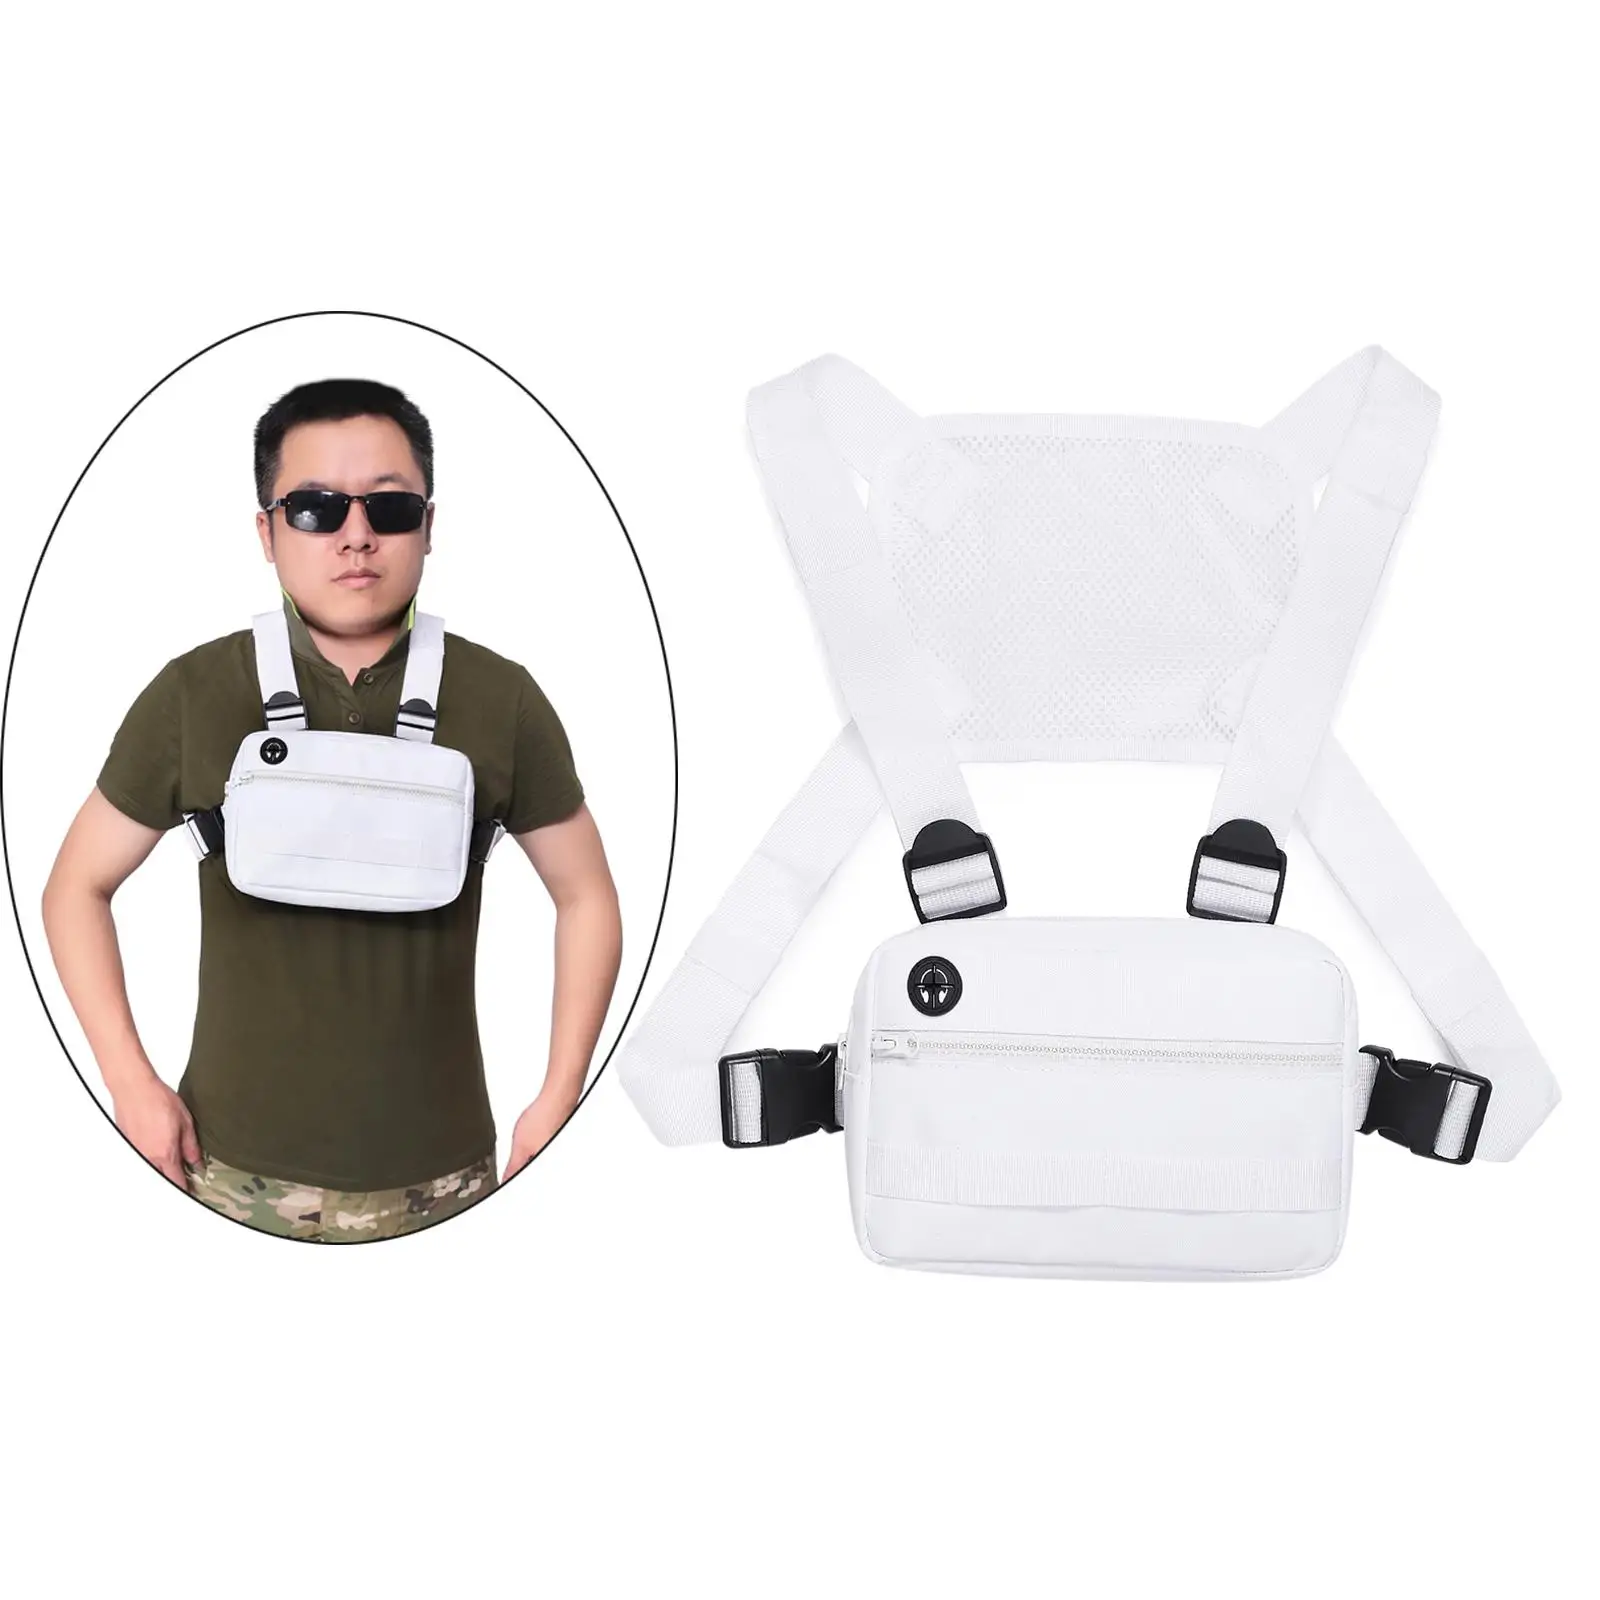 Vest Running Chest Rig Bag Hip Hop Streetwear Sports PhBags Pouch